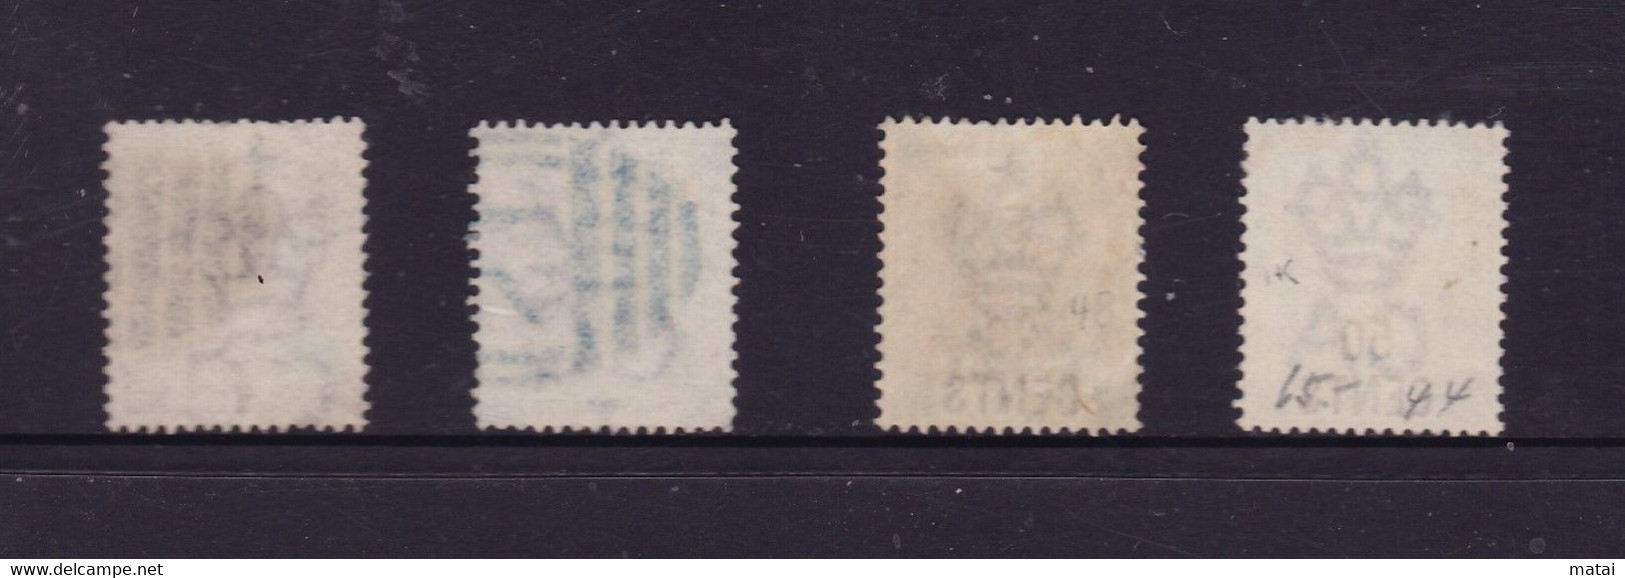 HONG KONG 2 C. + 12 C. ，  20 CENTS On 30 C, 50 CENTS On 48 C., Both Cancelled, Vf, Ovpr. With Chinese Caracters Also - 1941-45 Ocupacion Japonesa